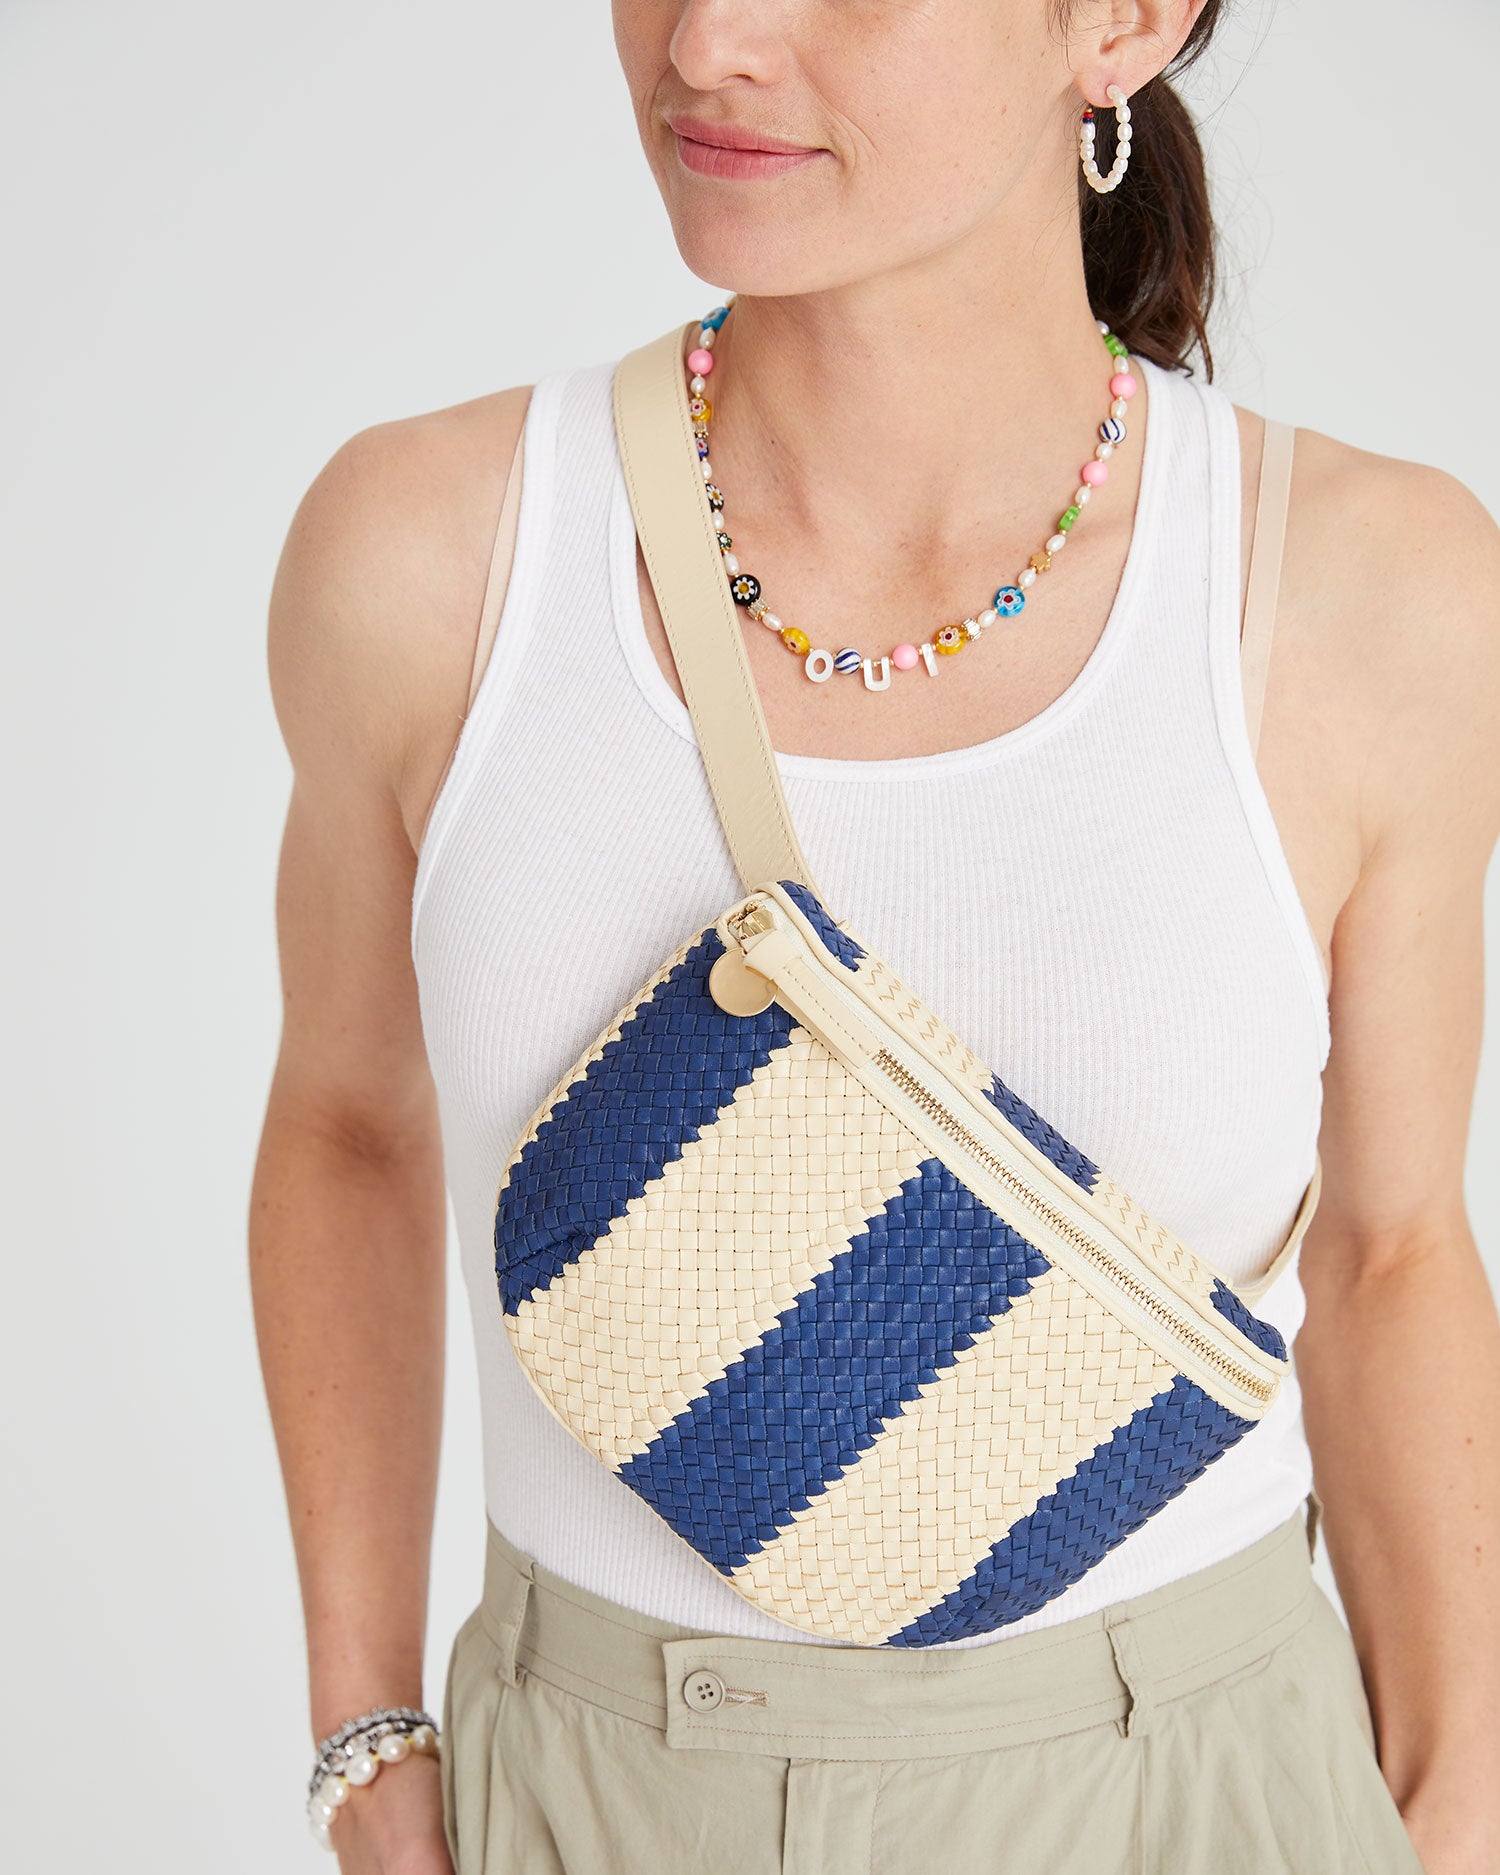 danica wearing the Indigo & Cream Woven Racing Stripes Fanny Pack around her chest